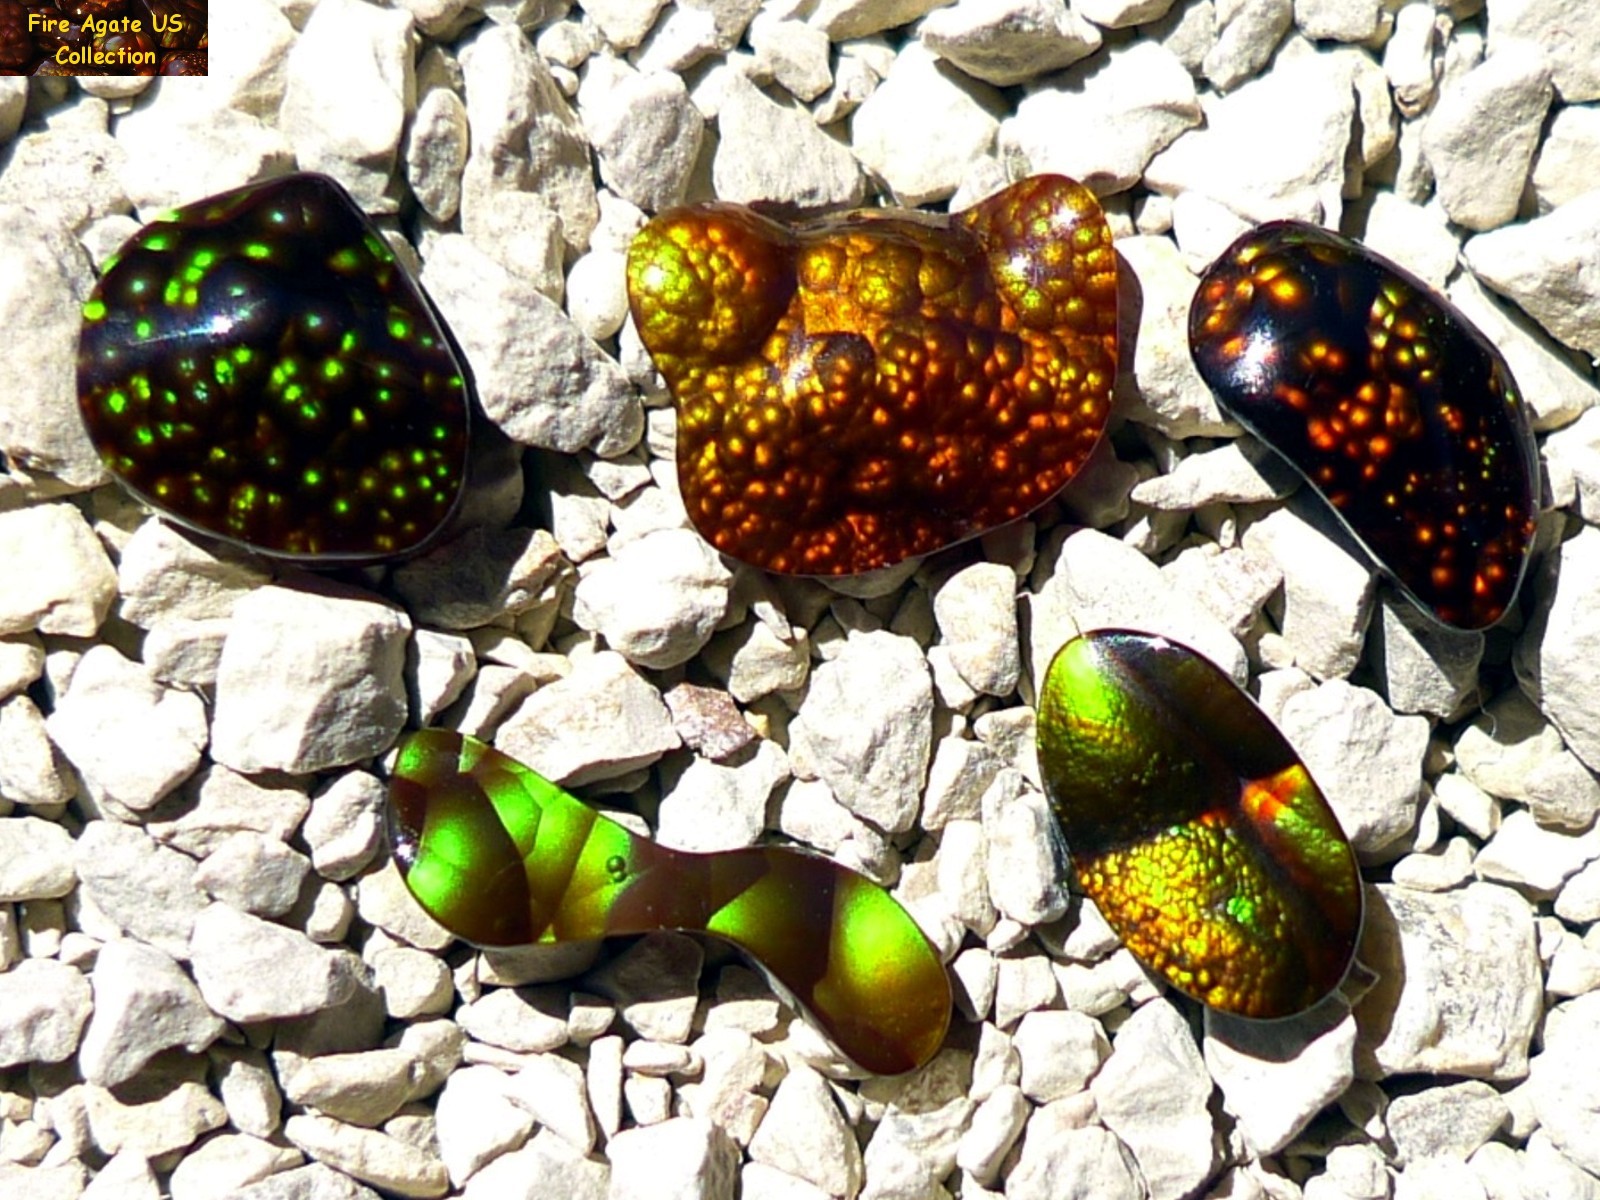 Group of Five Fire Agate Cabochons 4.6 Total Carat Weight Deer Creek Slaughter Mountain Arizona Gems SLG068 Photo 6